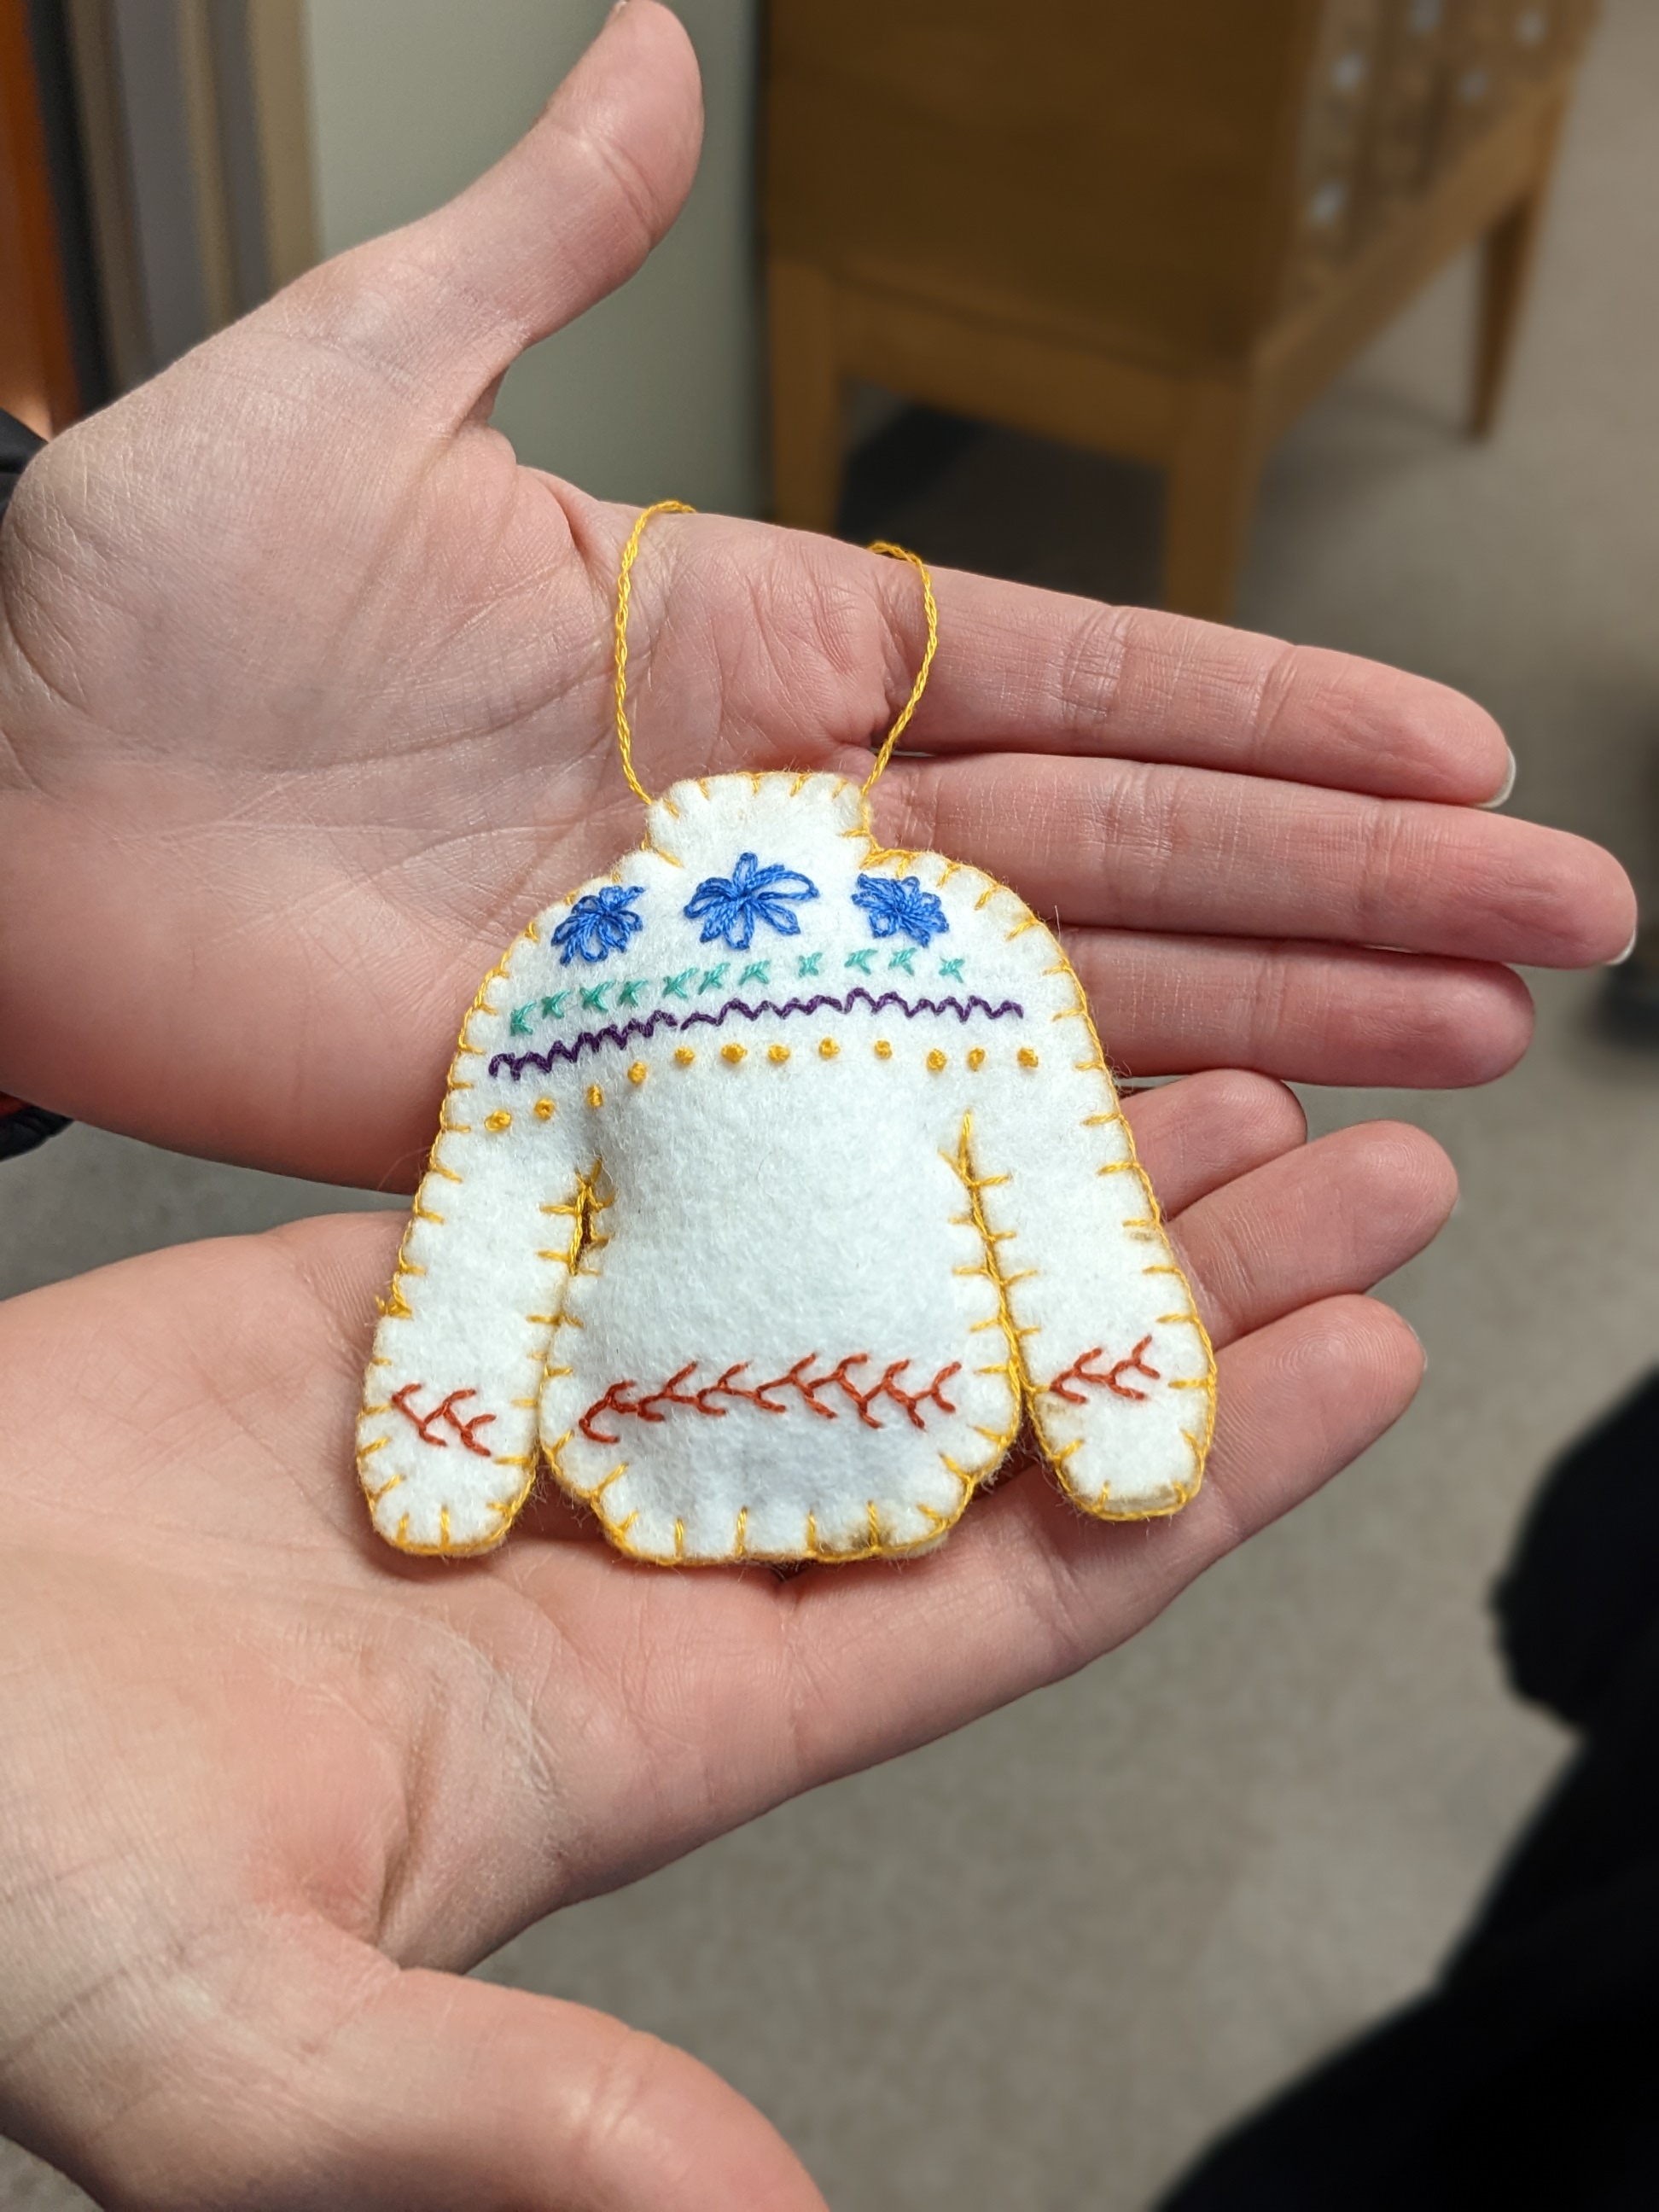 Two hands holding a hand-sewn and hand-embroidered felt ornament that looks like a sweater.